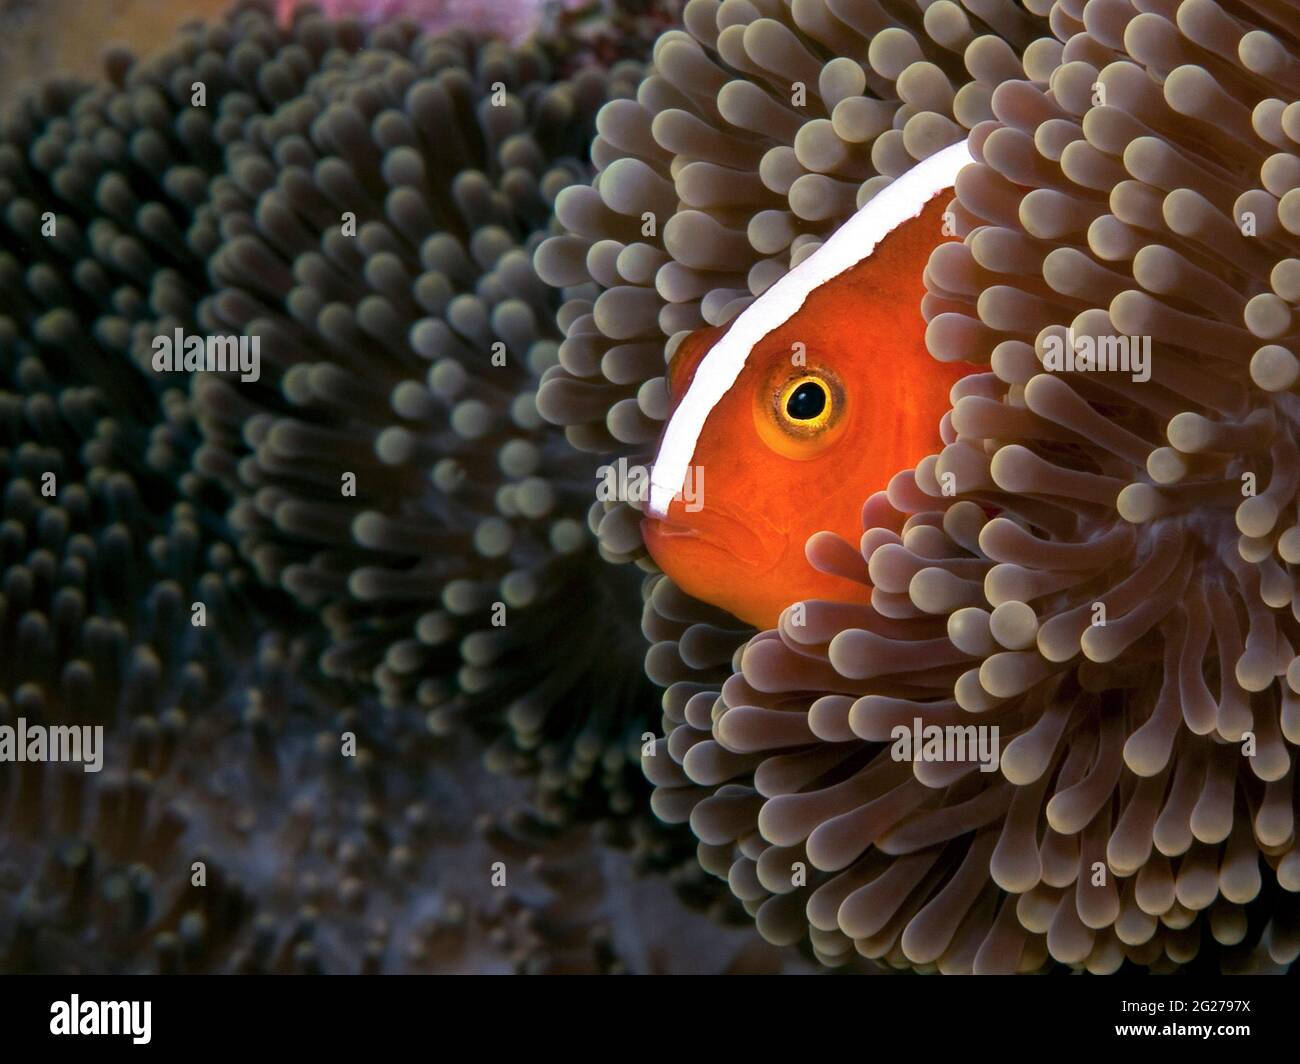 Orange skunk clownfish (Amphiprion sandaracinos) peeks out from its host sea anemone. Stock Photo